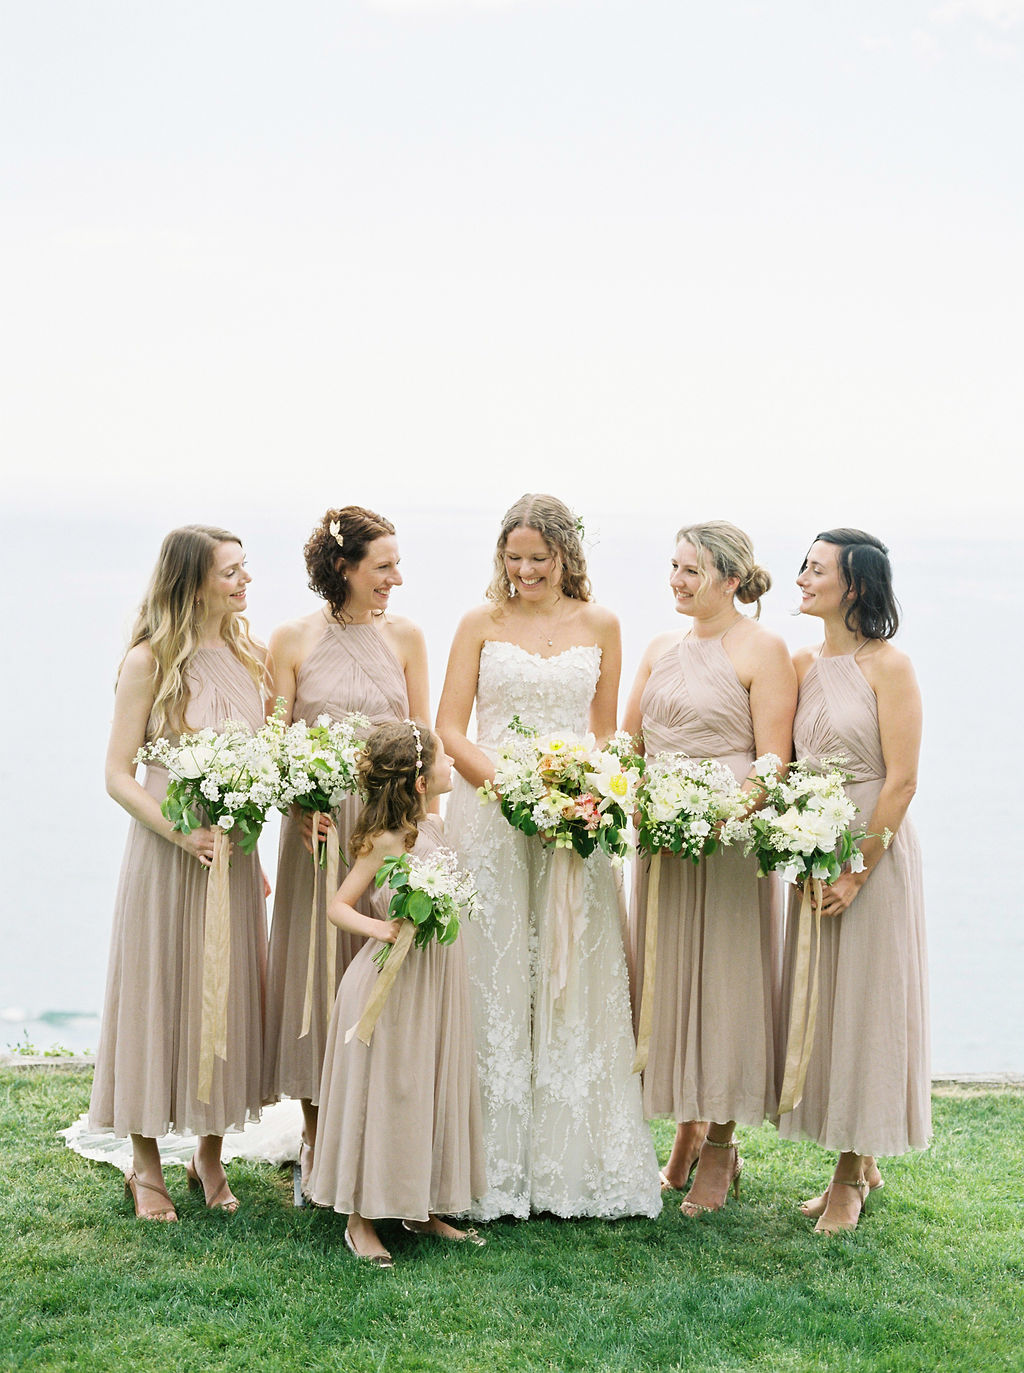 Brides and Bridesmaids bouquets using seasonal flowers.